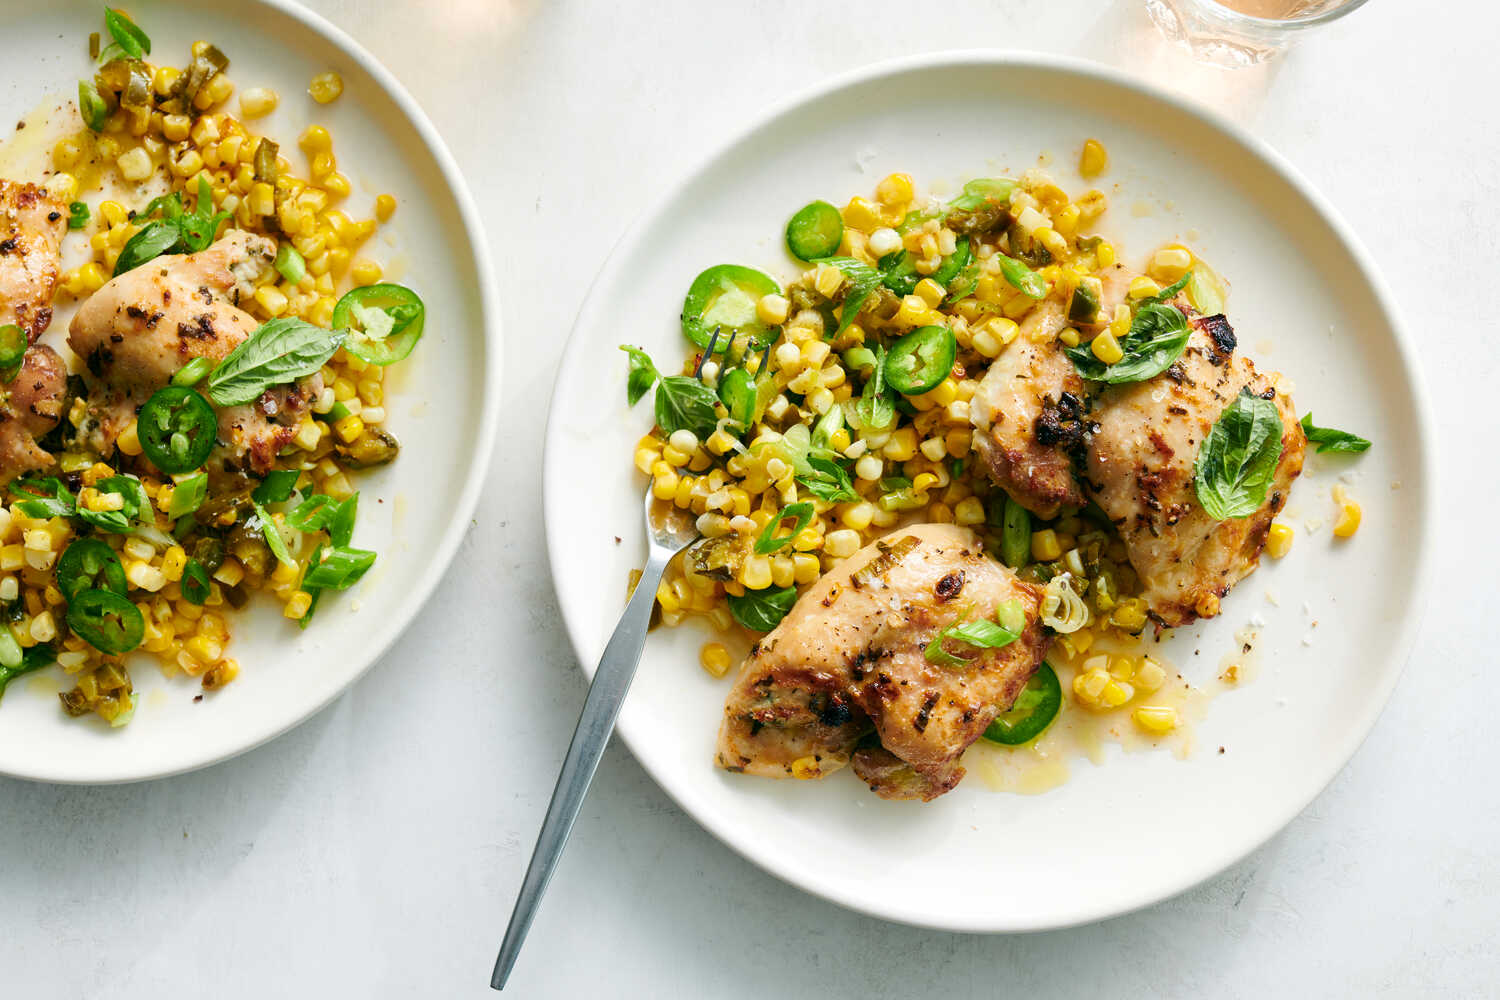 This sheet-pan meal brings out the more complex side of summer corn.